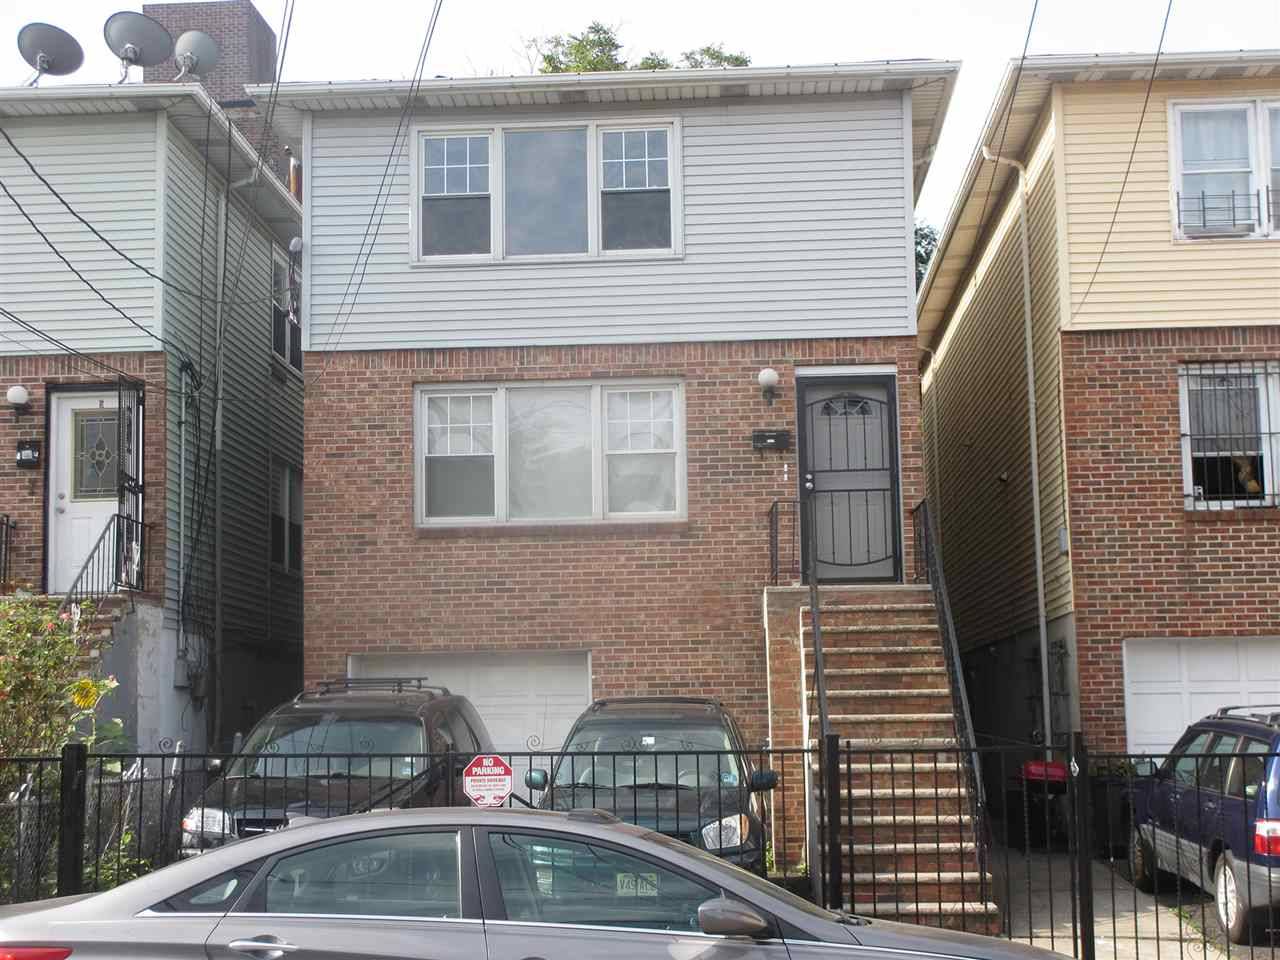 Spacious and renovated 3 bed/1 bath home in the McGinley Square section of Journal Square